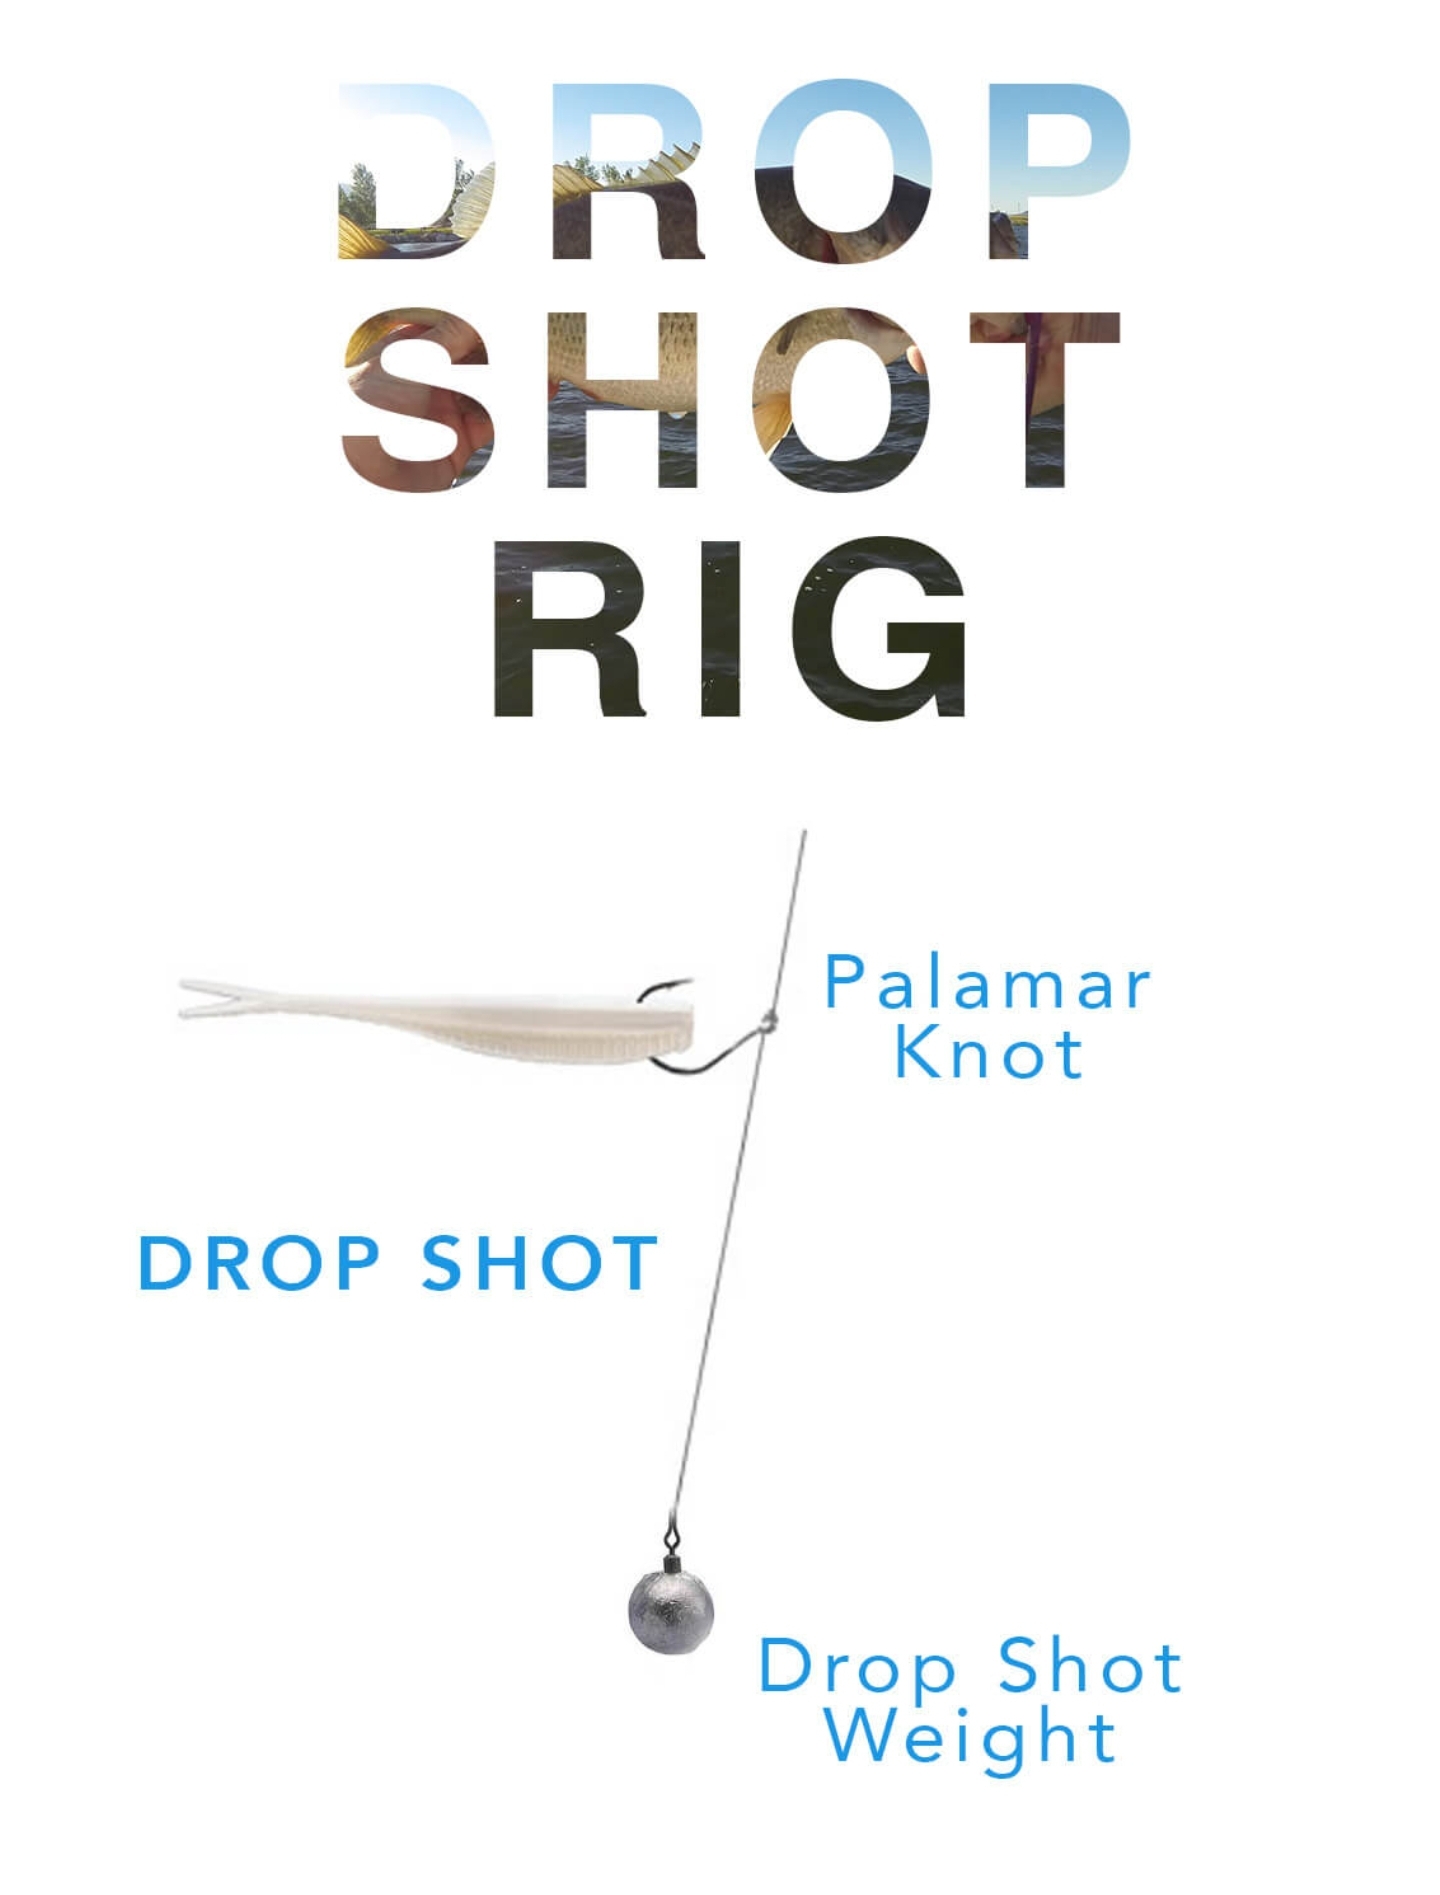 How to Ice Fish Walleye with the Drop Shot Rig